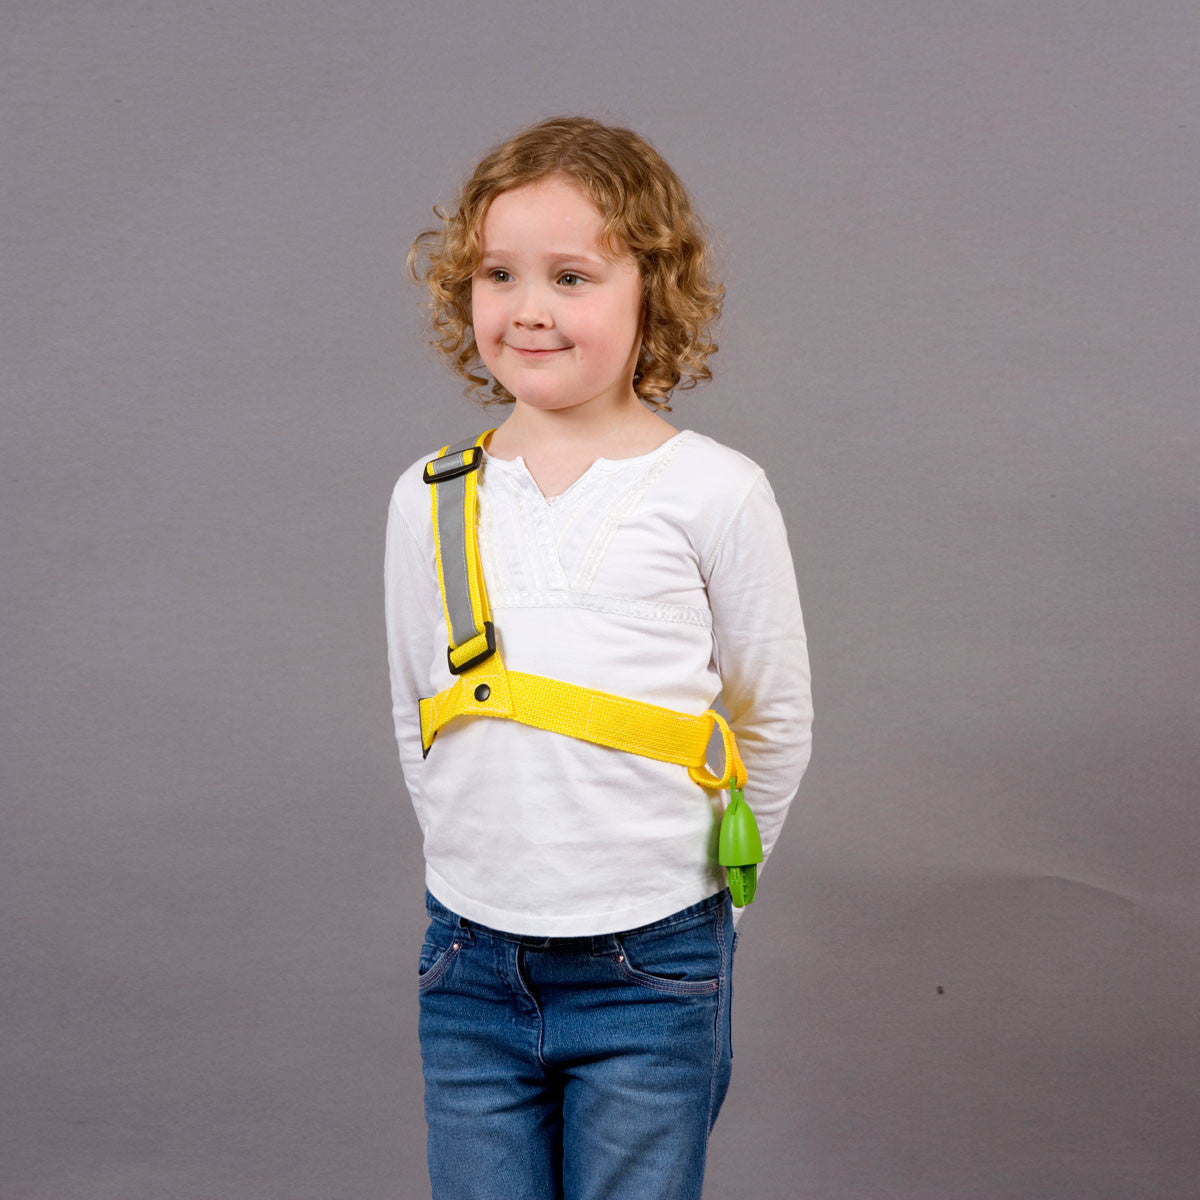 Walkodile Classic (6 child) - Safety Walking System for Children